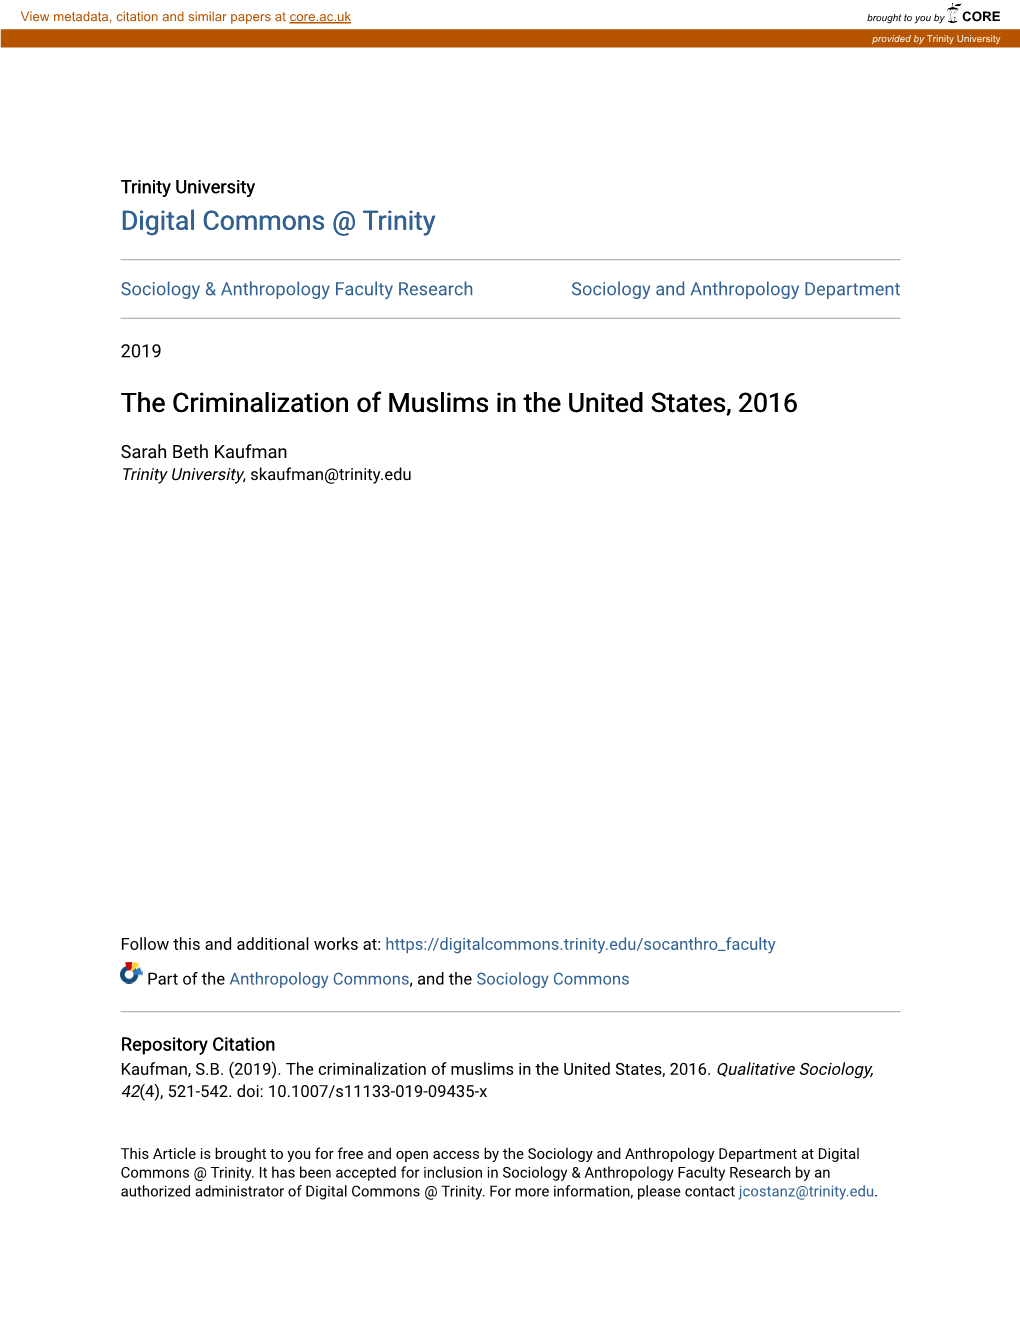 The Criminalization of Muslims in the United States, 2016